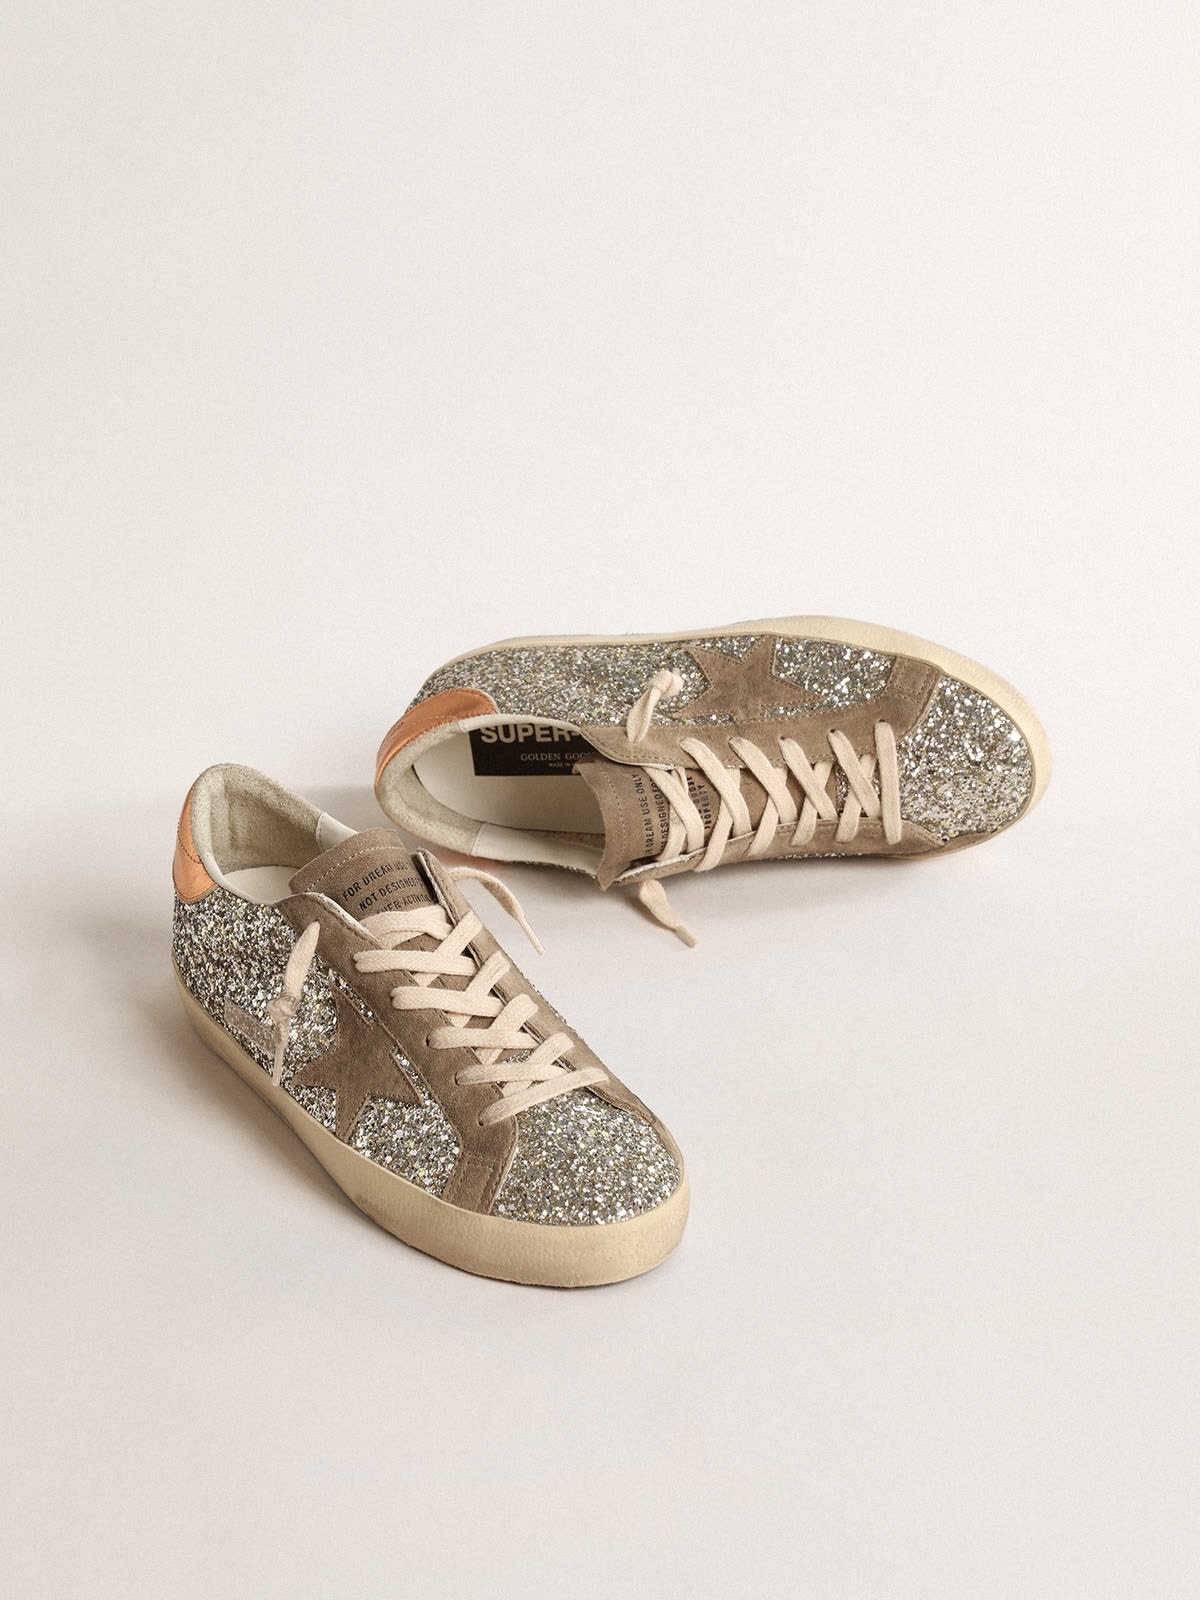 Super-Star in silver glitter with ice-gray suede star